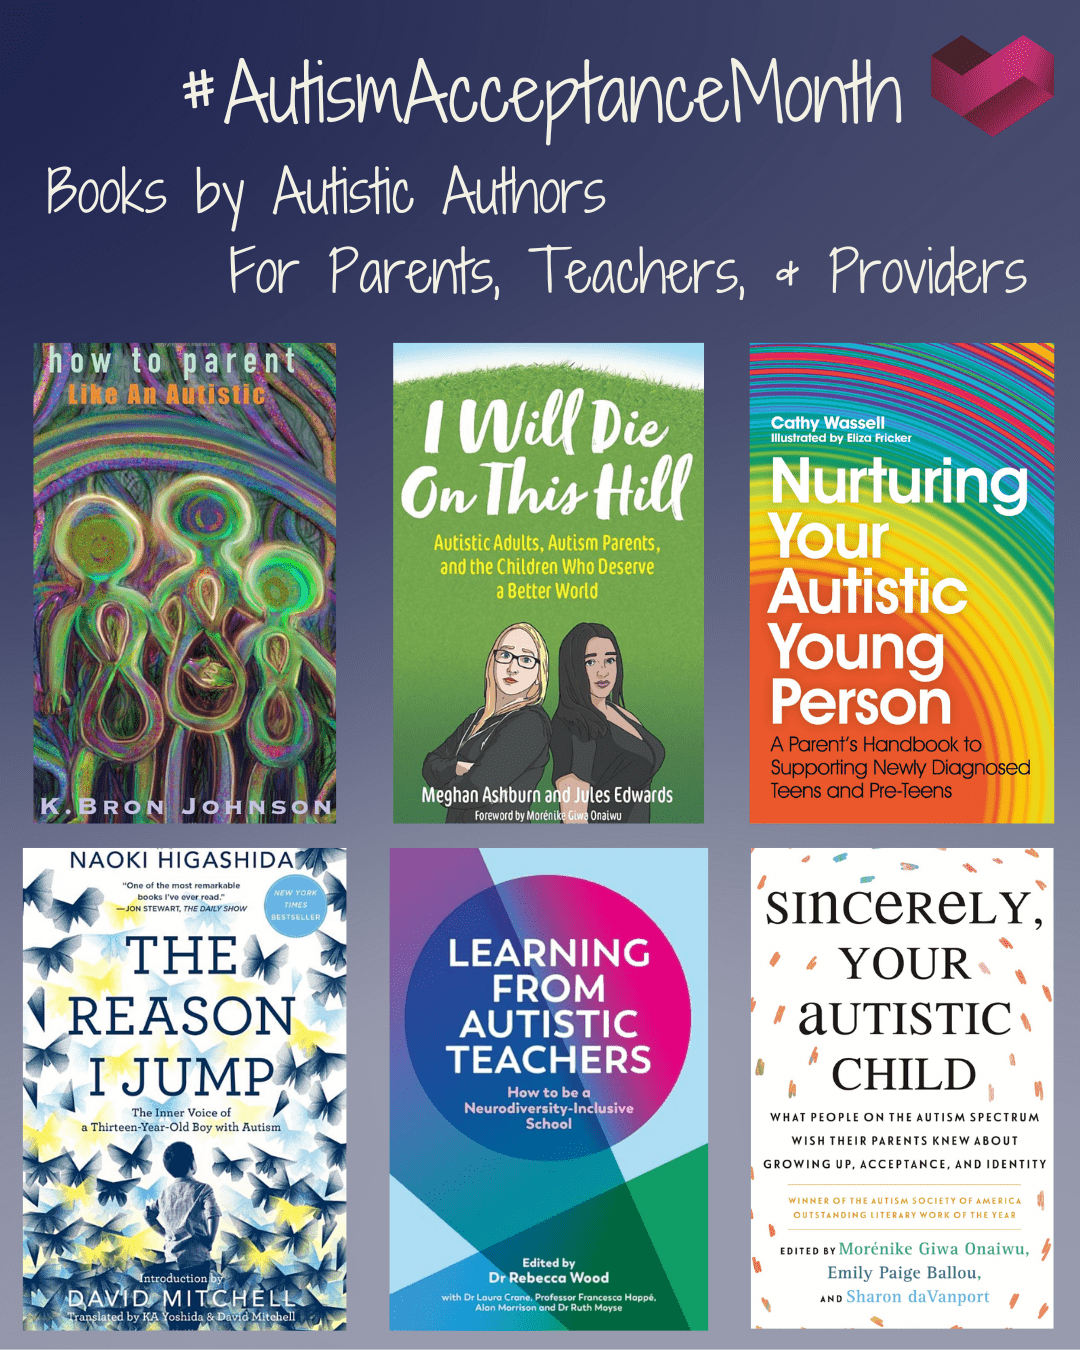 How to Parent Like An Autistic by K. Bron Johnson I Will Die On This Hill by Meghan Ashburn and Jules Edwards Nurturing Your Autistic Young Person by Cathy Wassell The Reason I Jump by Naoki Higashida Learning from Autistic Teachers